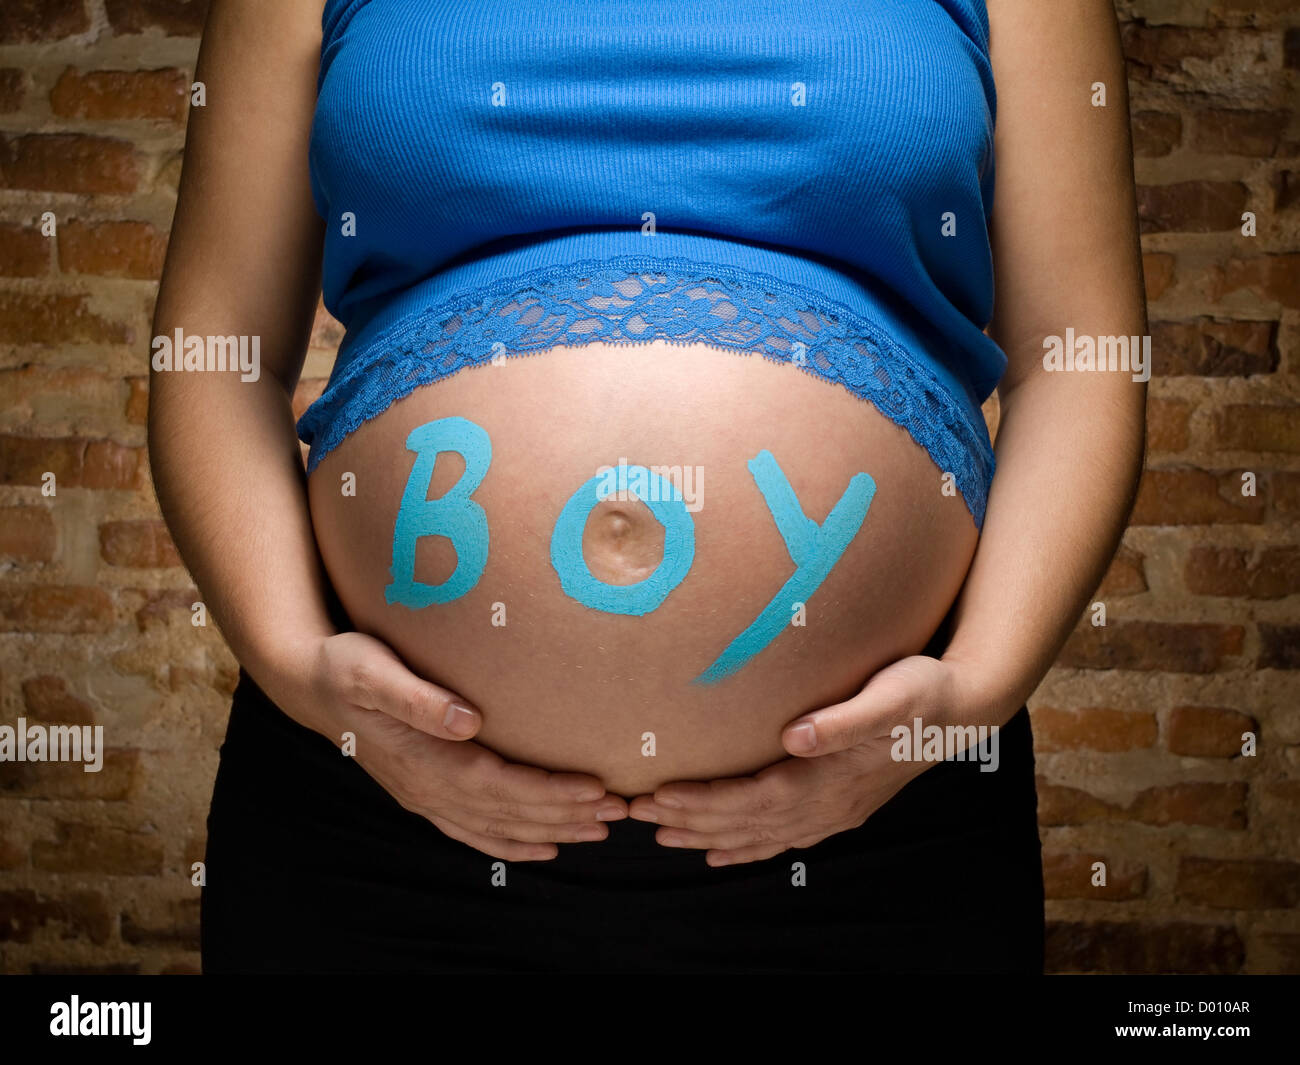 woman pregnant with a boy